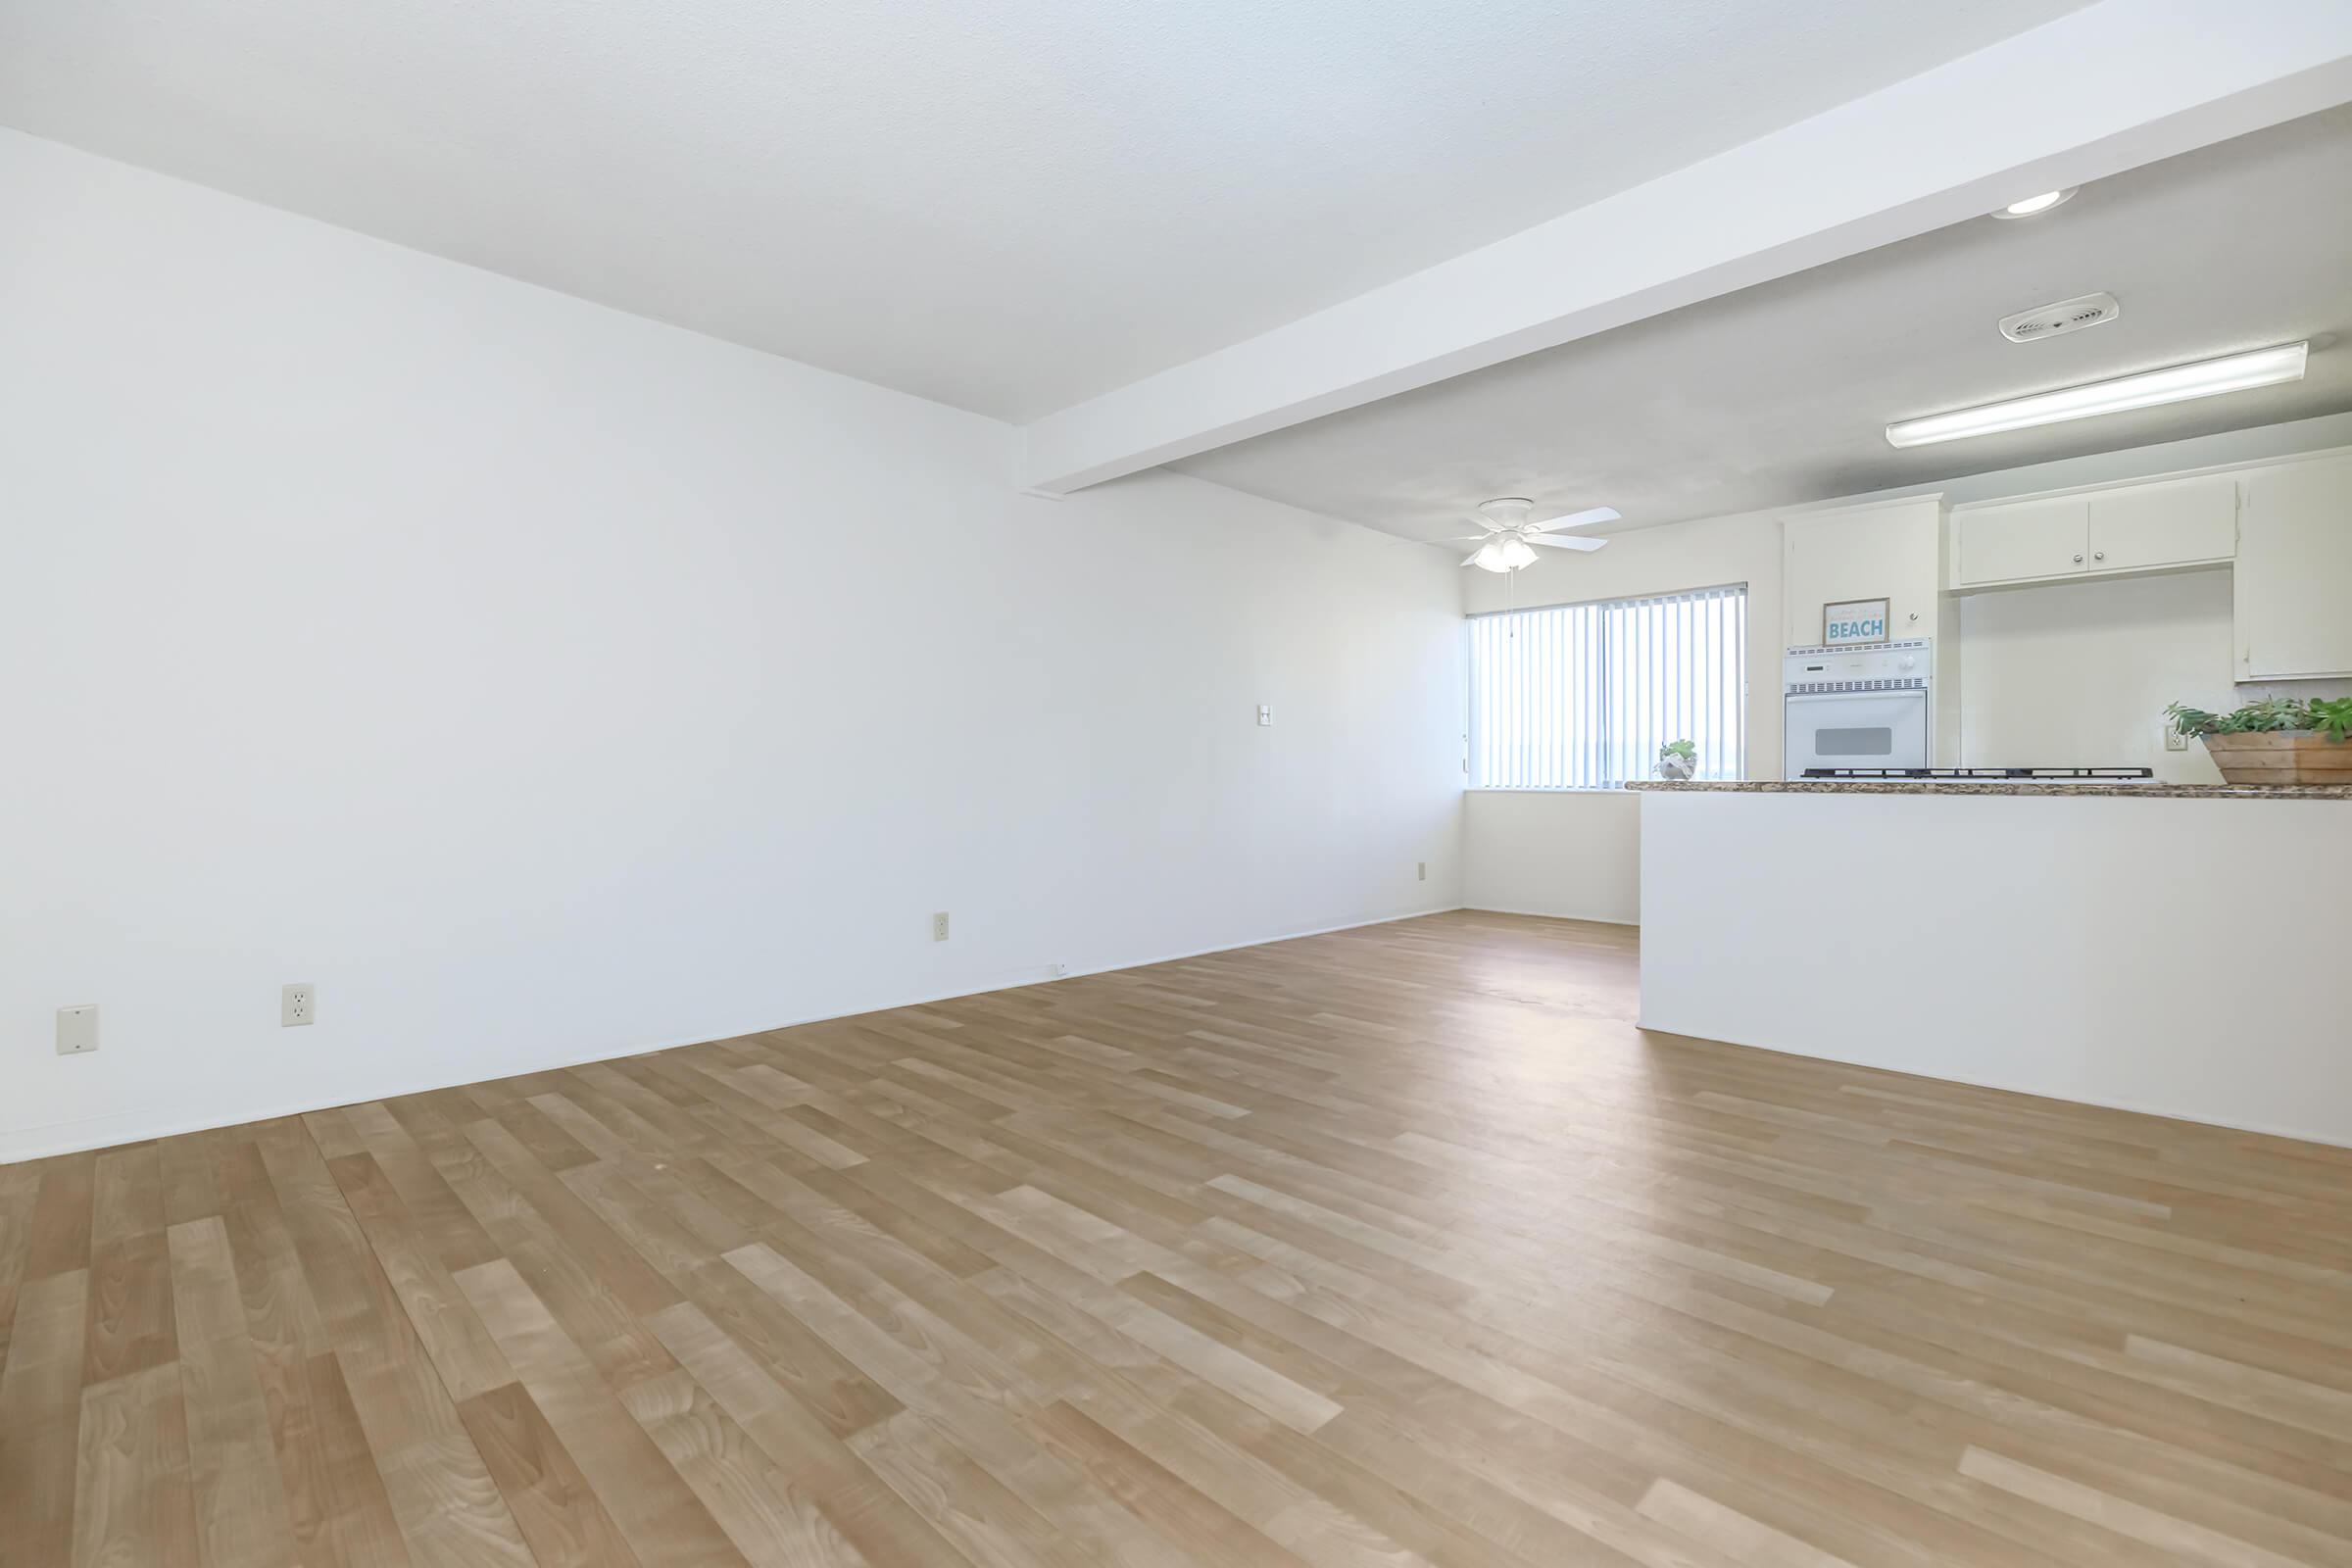 Unfurnished living room with wooden floors